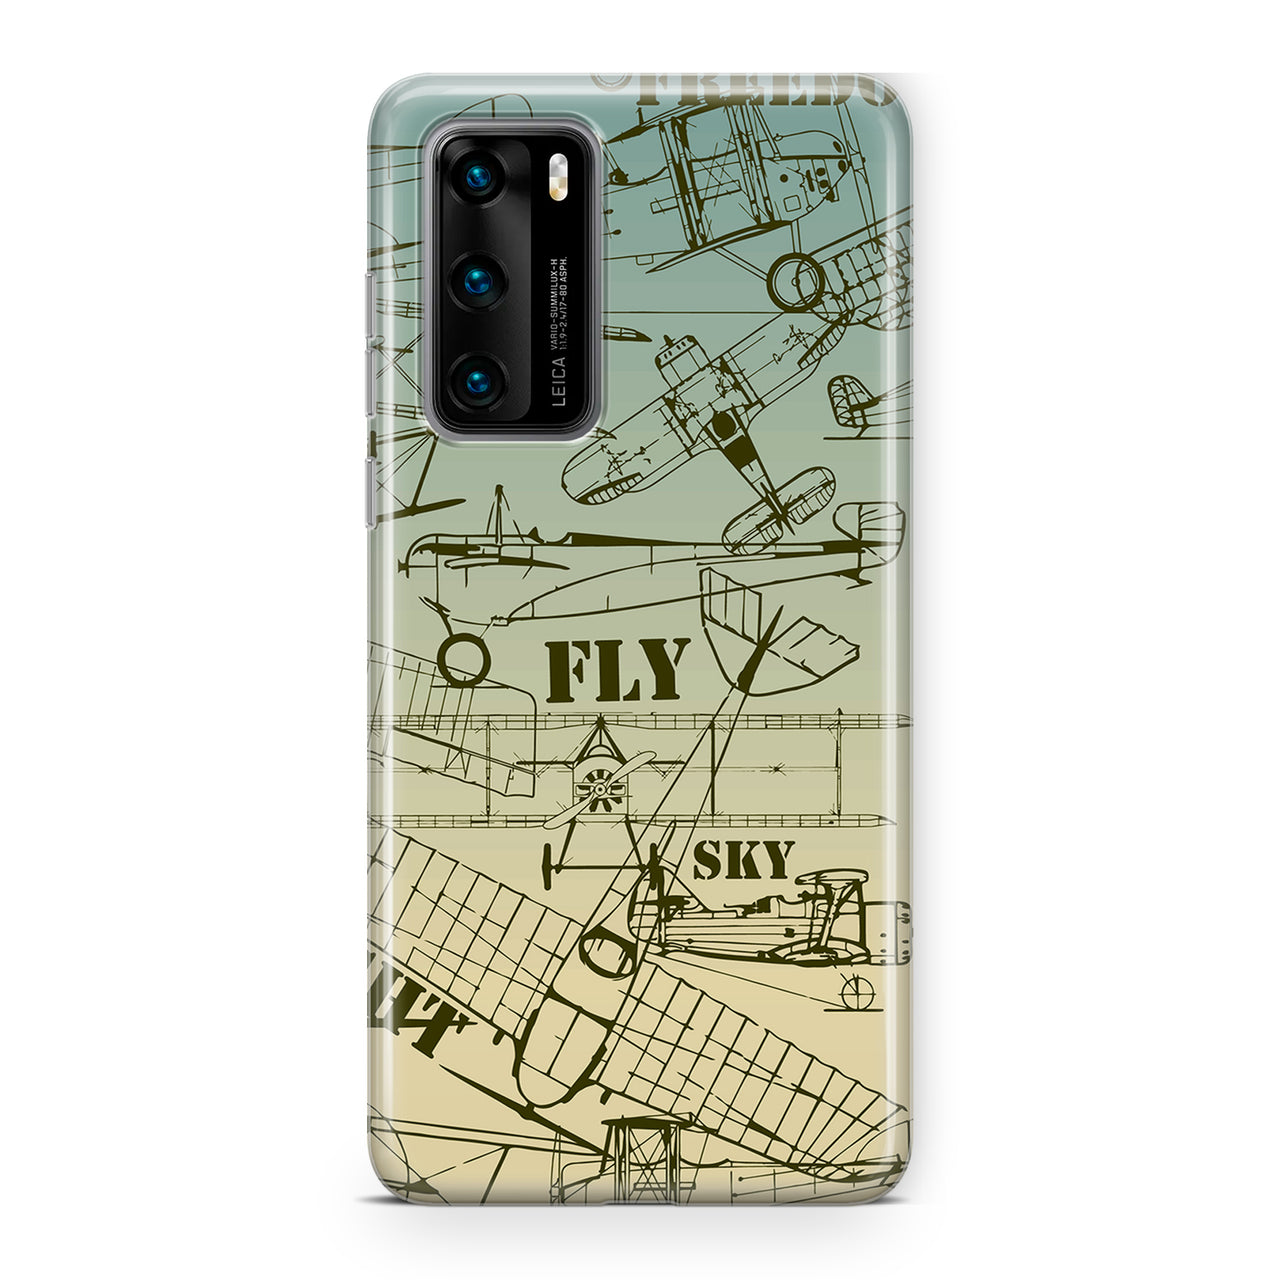 Retro Airplanes & Text Designed Huawei Cases